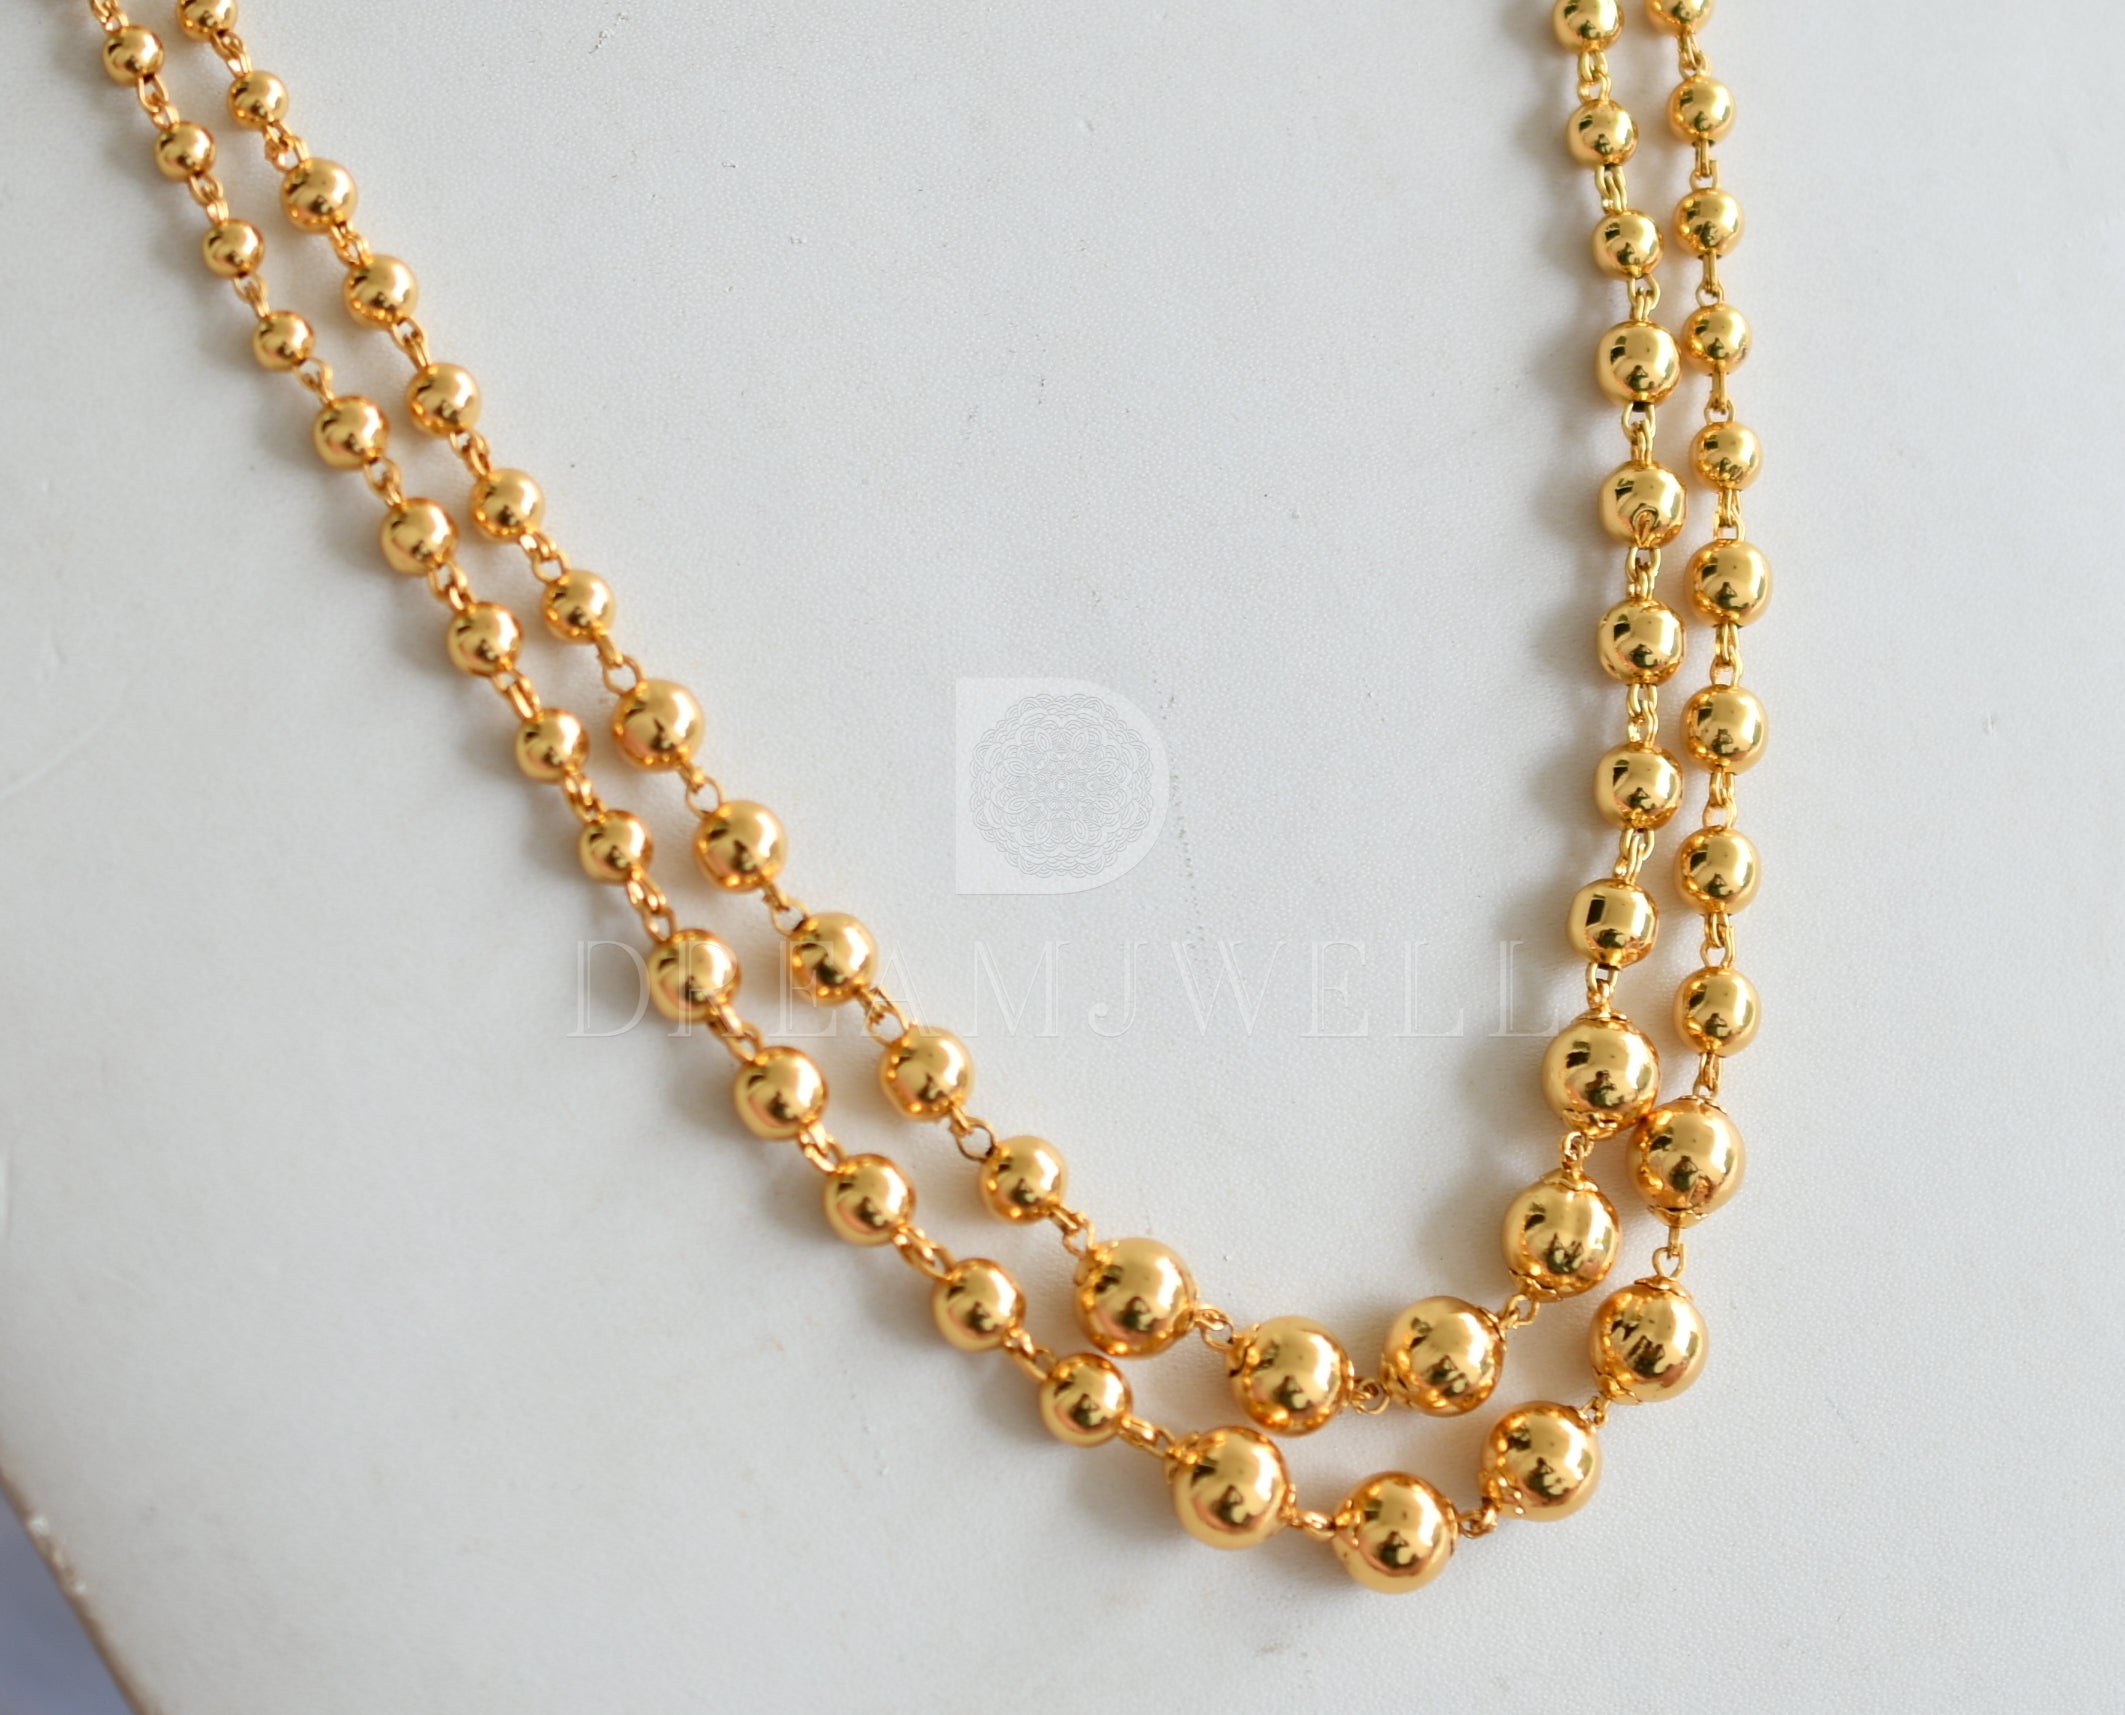 8mm fully iced out beads chain necklace White Gold – Bijouterie Gonin